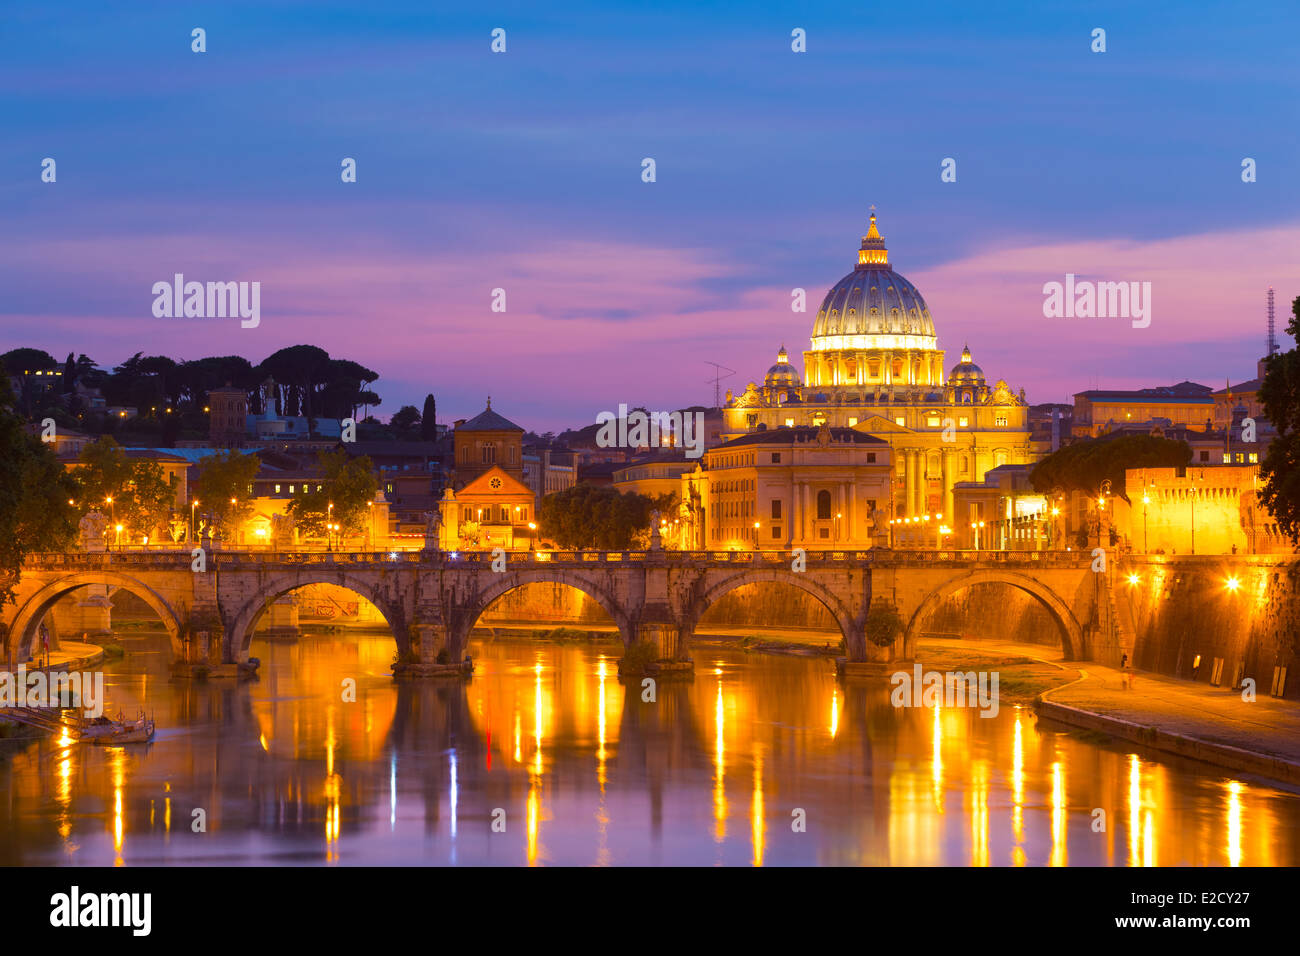 View at St. Peter's cathedral in Rome, Italy Stock Photo